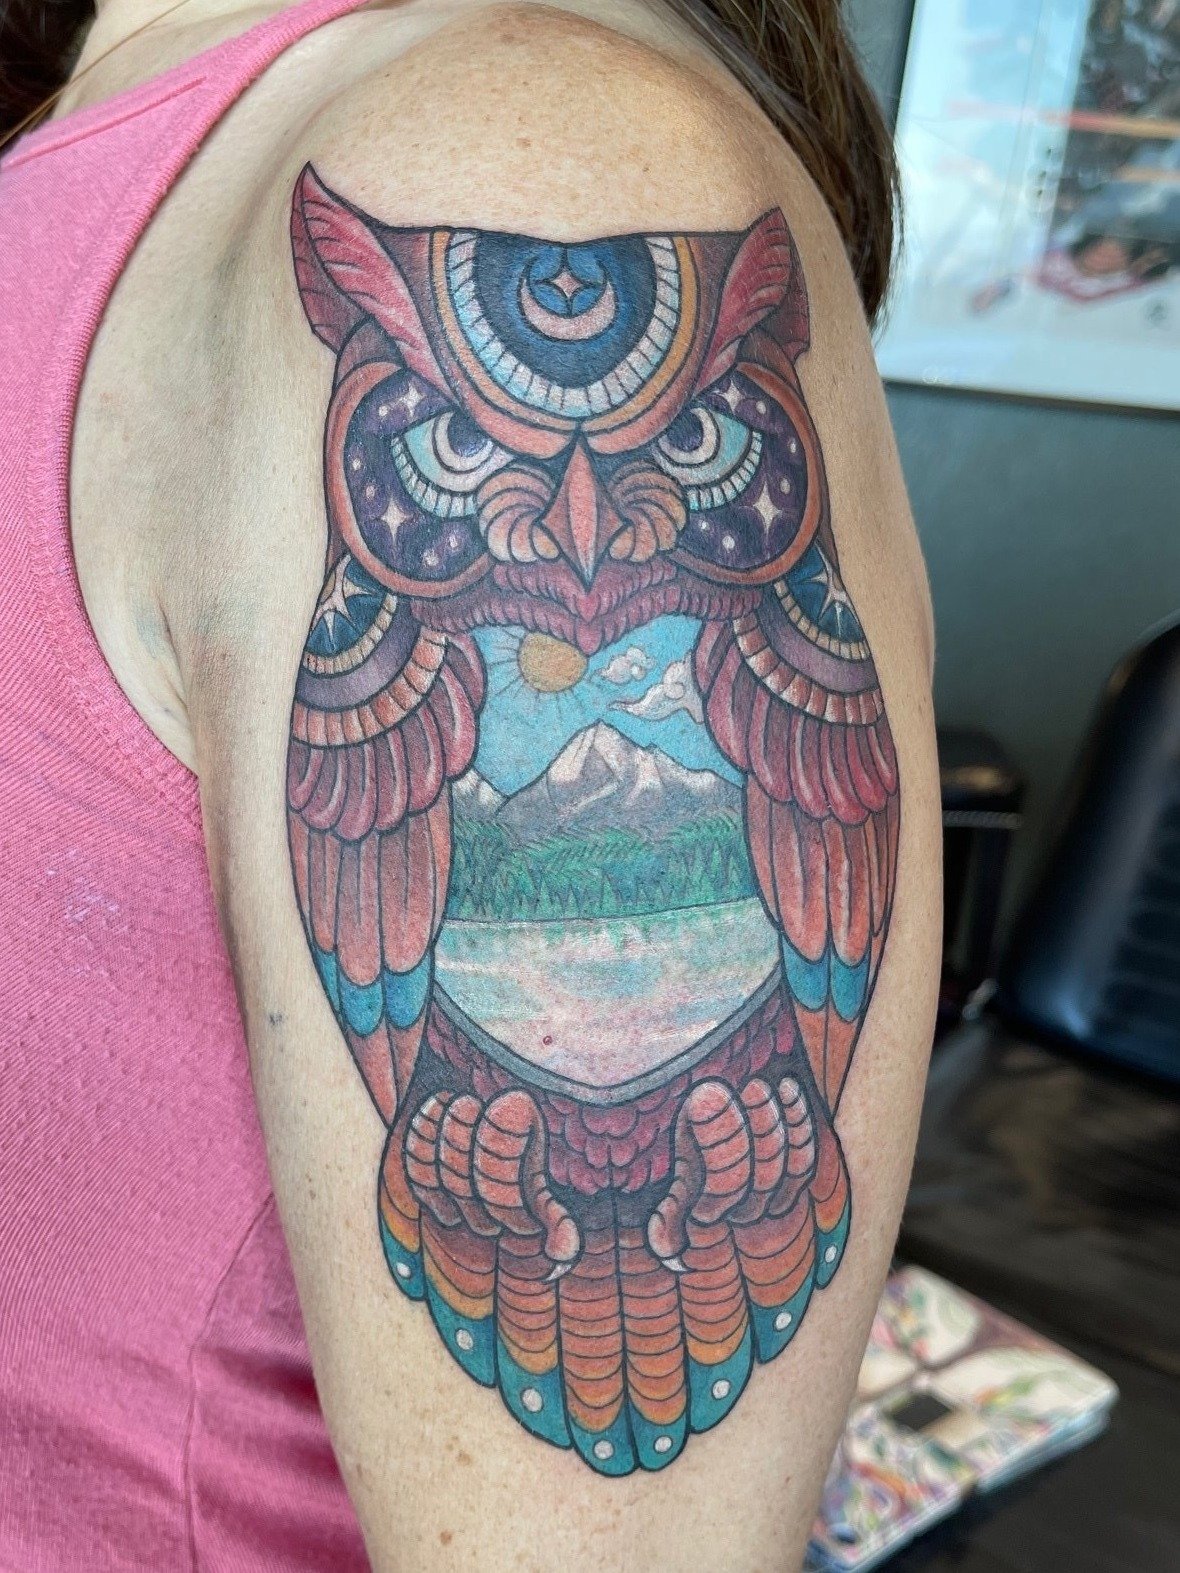 Owl and landscape tattoo